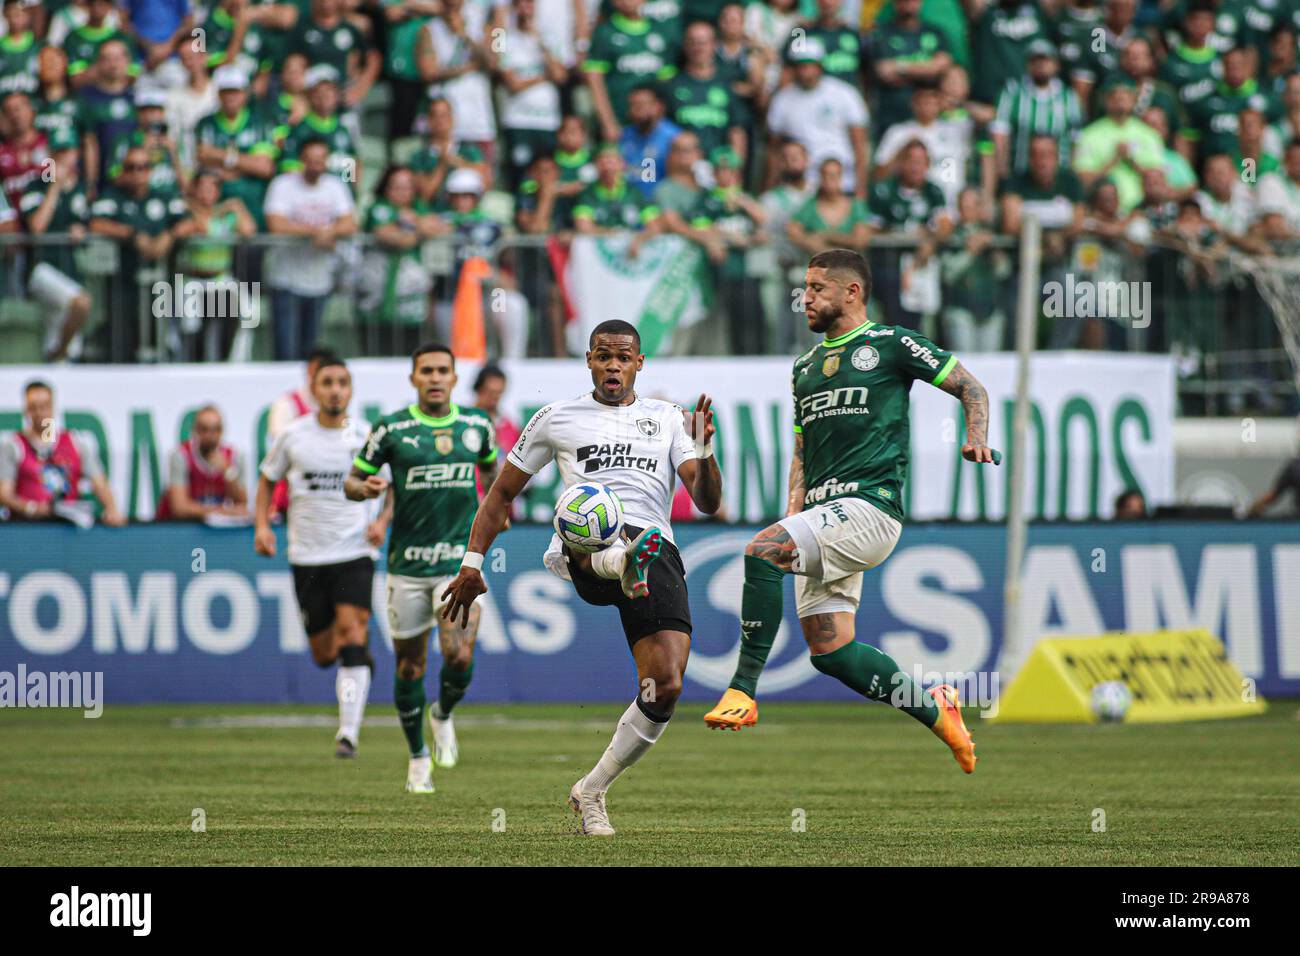 Sao Paulo, Brazil. 25th June, 2023. Ze Rafael of Palmeiras battles for possession with Junior Santos of Botafogo, during the match between Palmeiras and Botafogo, for the Brazilian Serie A 2023, at Allianz Parque Stadium, in Sao Paulo on June 25. Photo: Wanderson Oliveira/DiaEsportivo/Alamy Live News Credit: DiaEsportivo/Alamy Live News Stock Photo